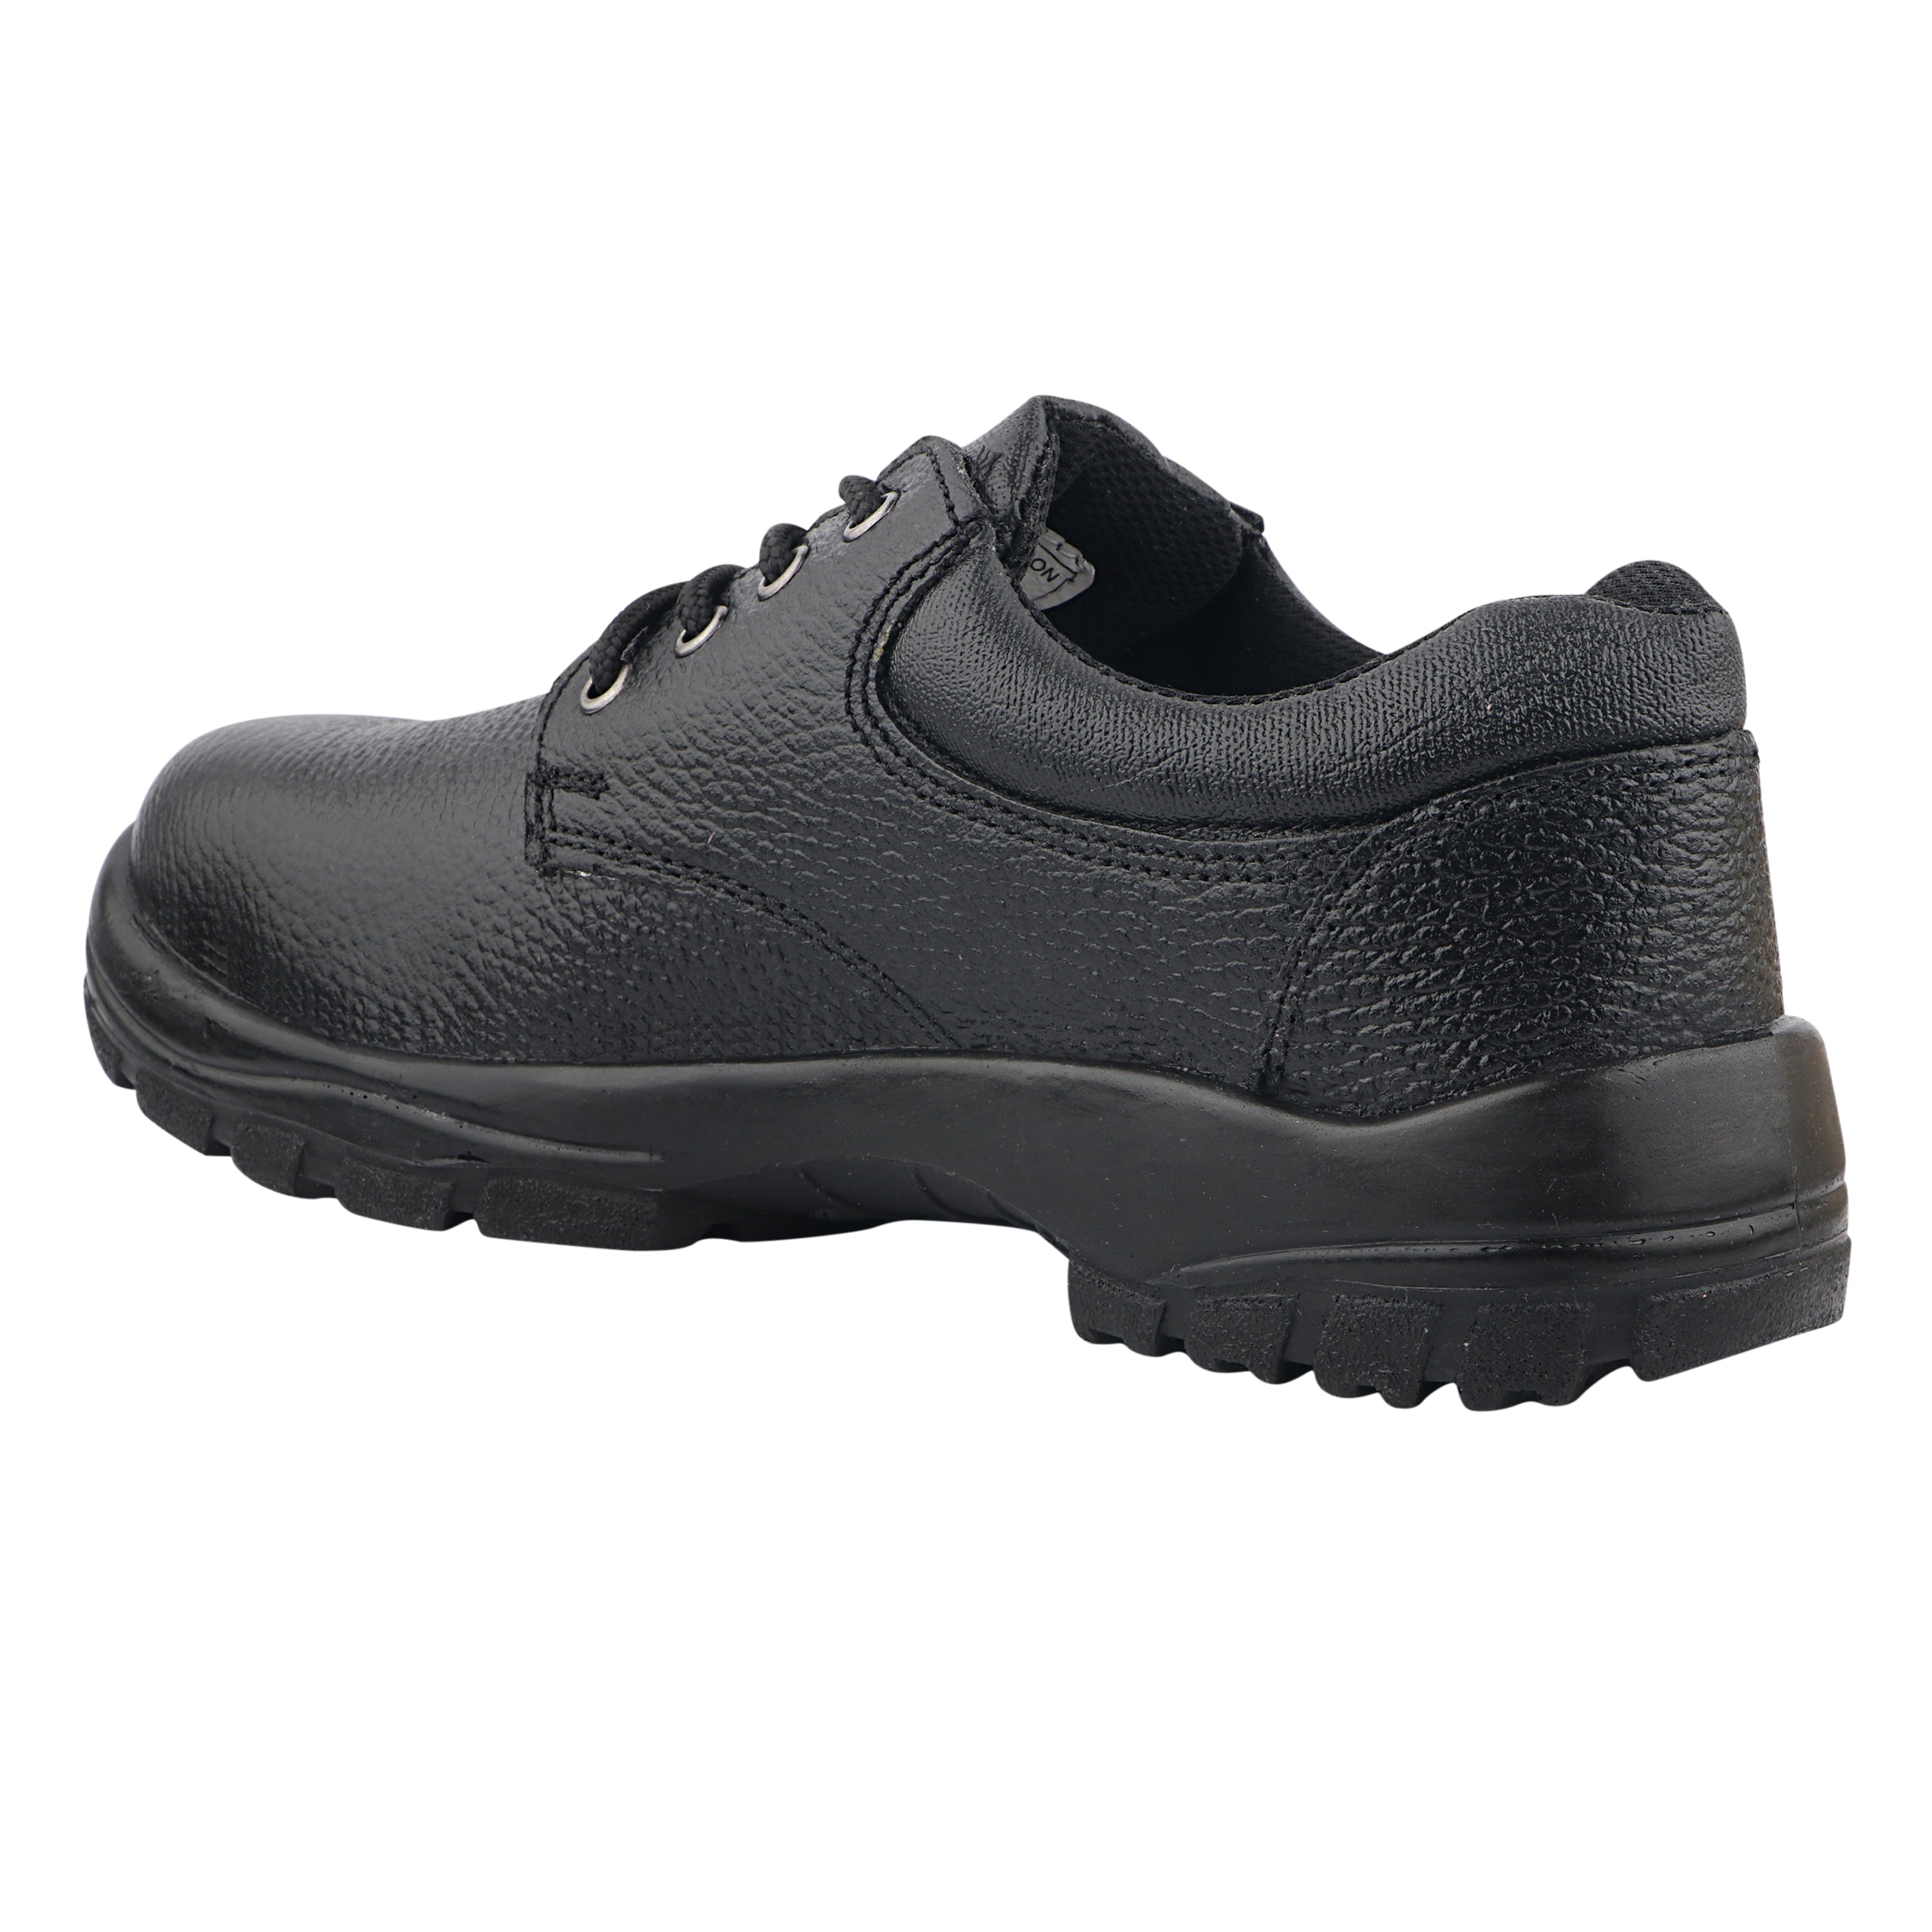 Fuel Falcon-01 Genuine Leather Safety Shoes for Men's Steel Toe Cap With Single Density PU Sole (Black)